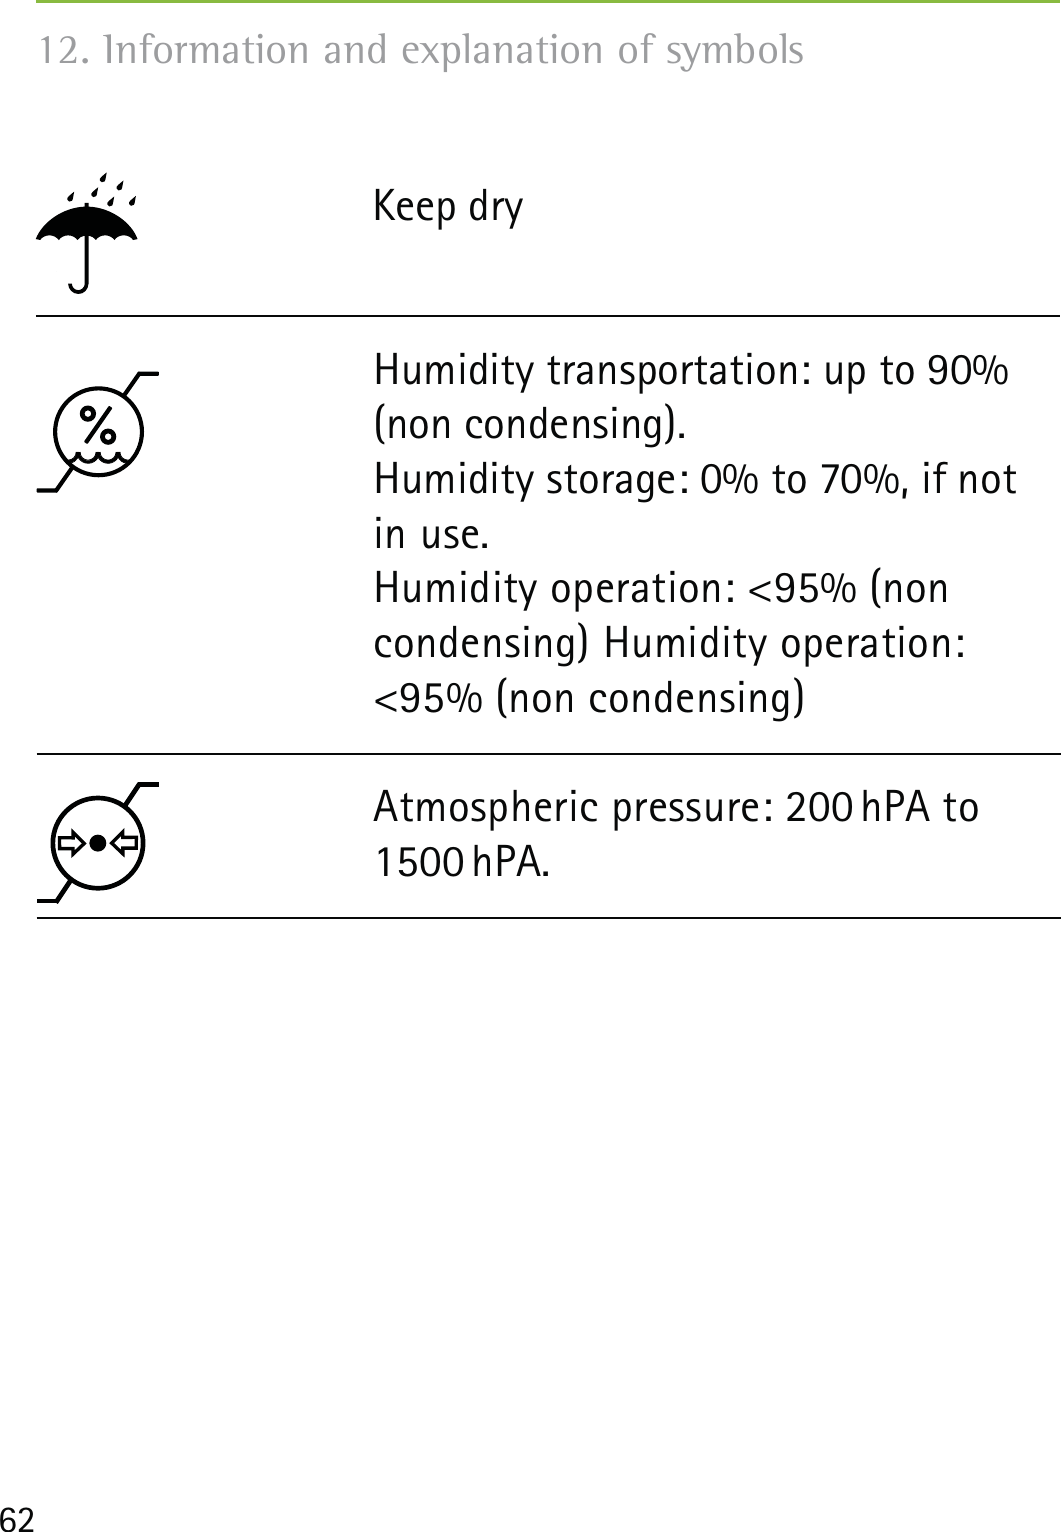 6212. Information and explanation of symbols Keep dry Humidity transportation: up to 90% (non condensing).  Humidity storage: 0% to 70%, if not in use. Humidity operation: &lt;95% (non  condensing) Humidity operation: &lt;95% (non condensing)Atmospheric pressure: 200 hPA to 1500 hPA.